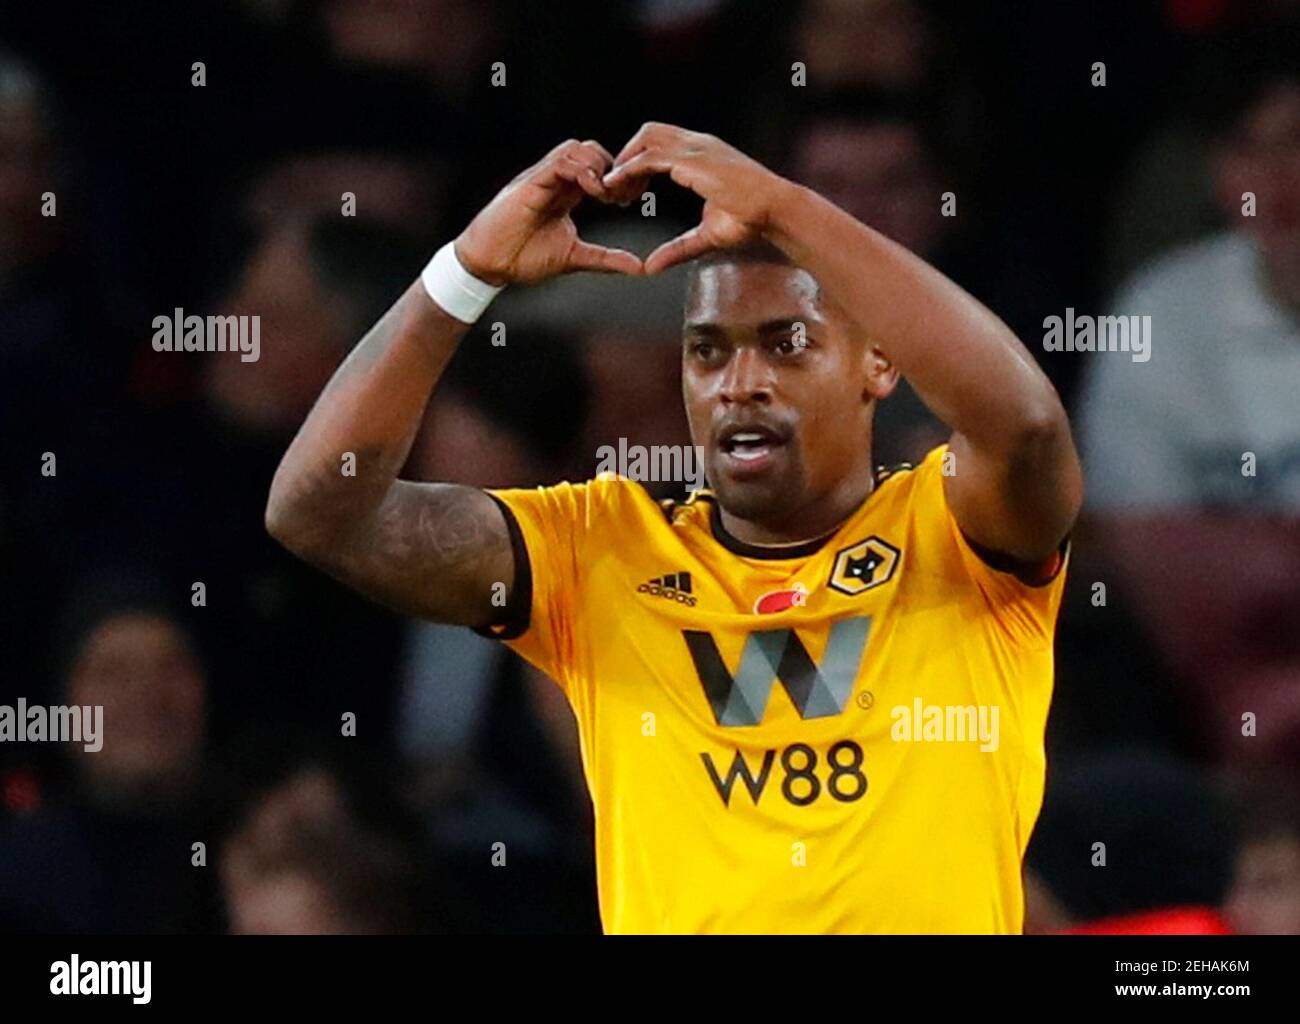 Soccer Football - Premier League - Arsenal v Wolverhampton Wanderers - Emirates Stadium, London, Britain - November 11, 2018  Wolverhampton Wanderers' Ivan Cavaleiro celebrates scoring their first goal  REUTERS/Eddie Keogh  EDITORIAL USE ONLY. No use with unauthorized audio, video, data, fixture lists, club/league logos or 'live' services. Online in-match use limited to 75 images, no video emulation. No use in betting, games or single club/league/player publications.  Please contact your account representative for further details. Stock Photo